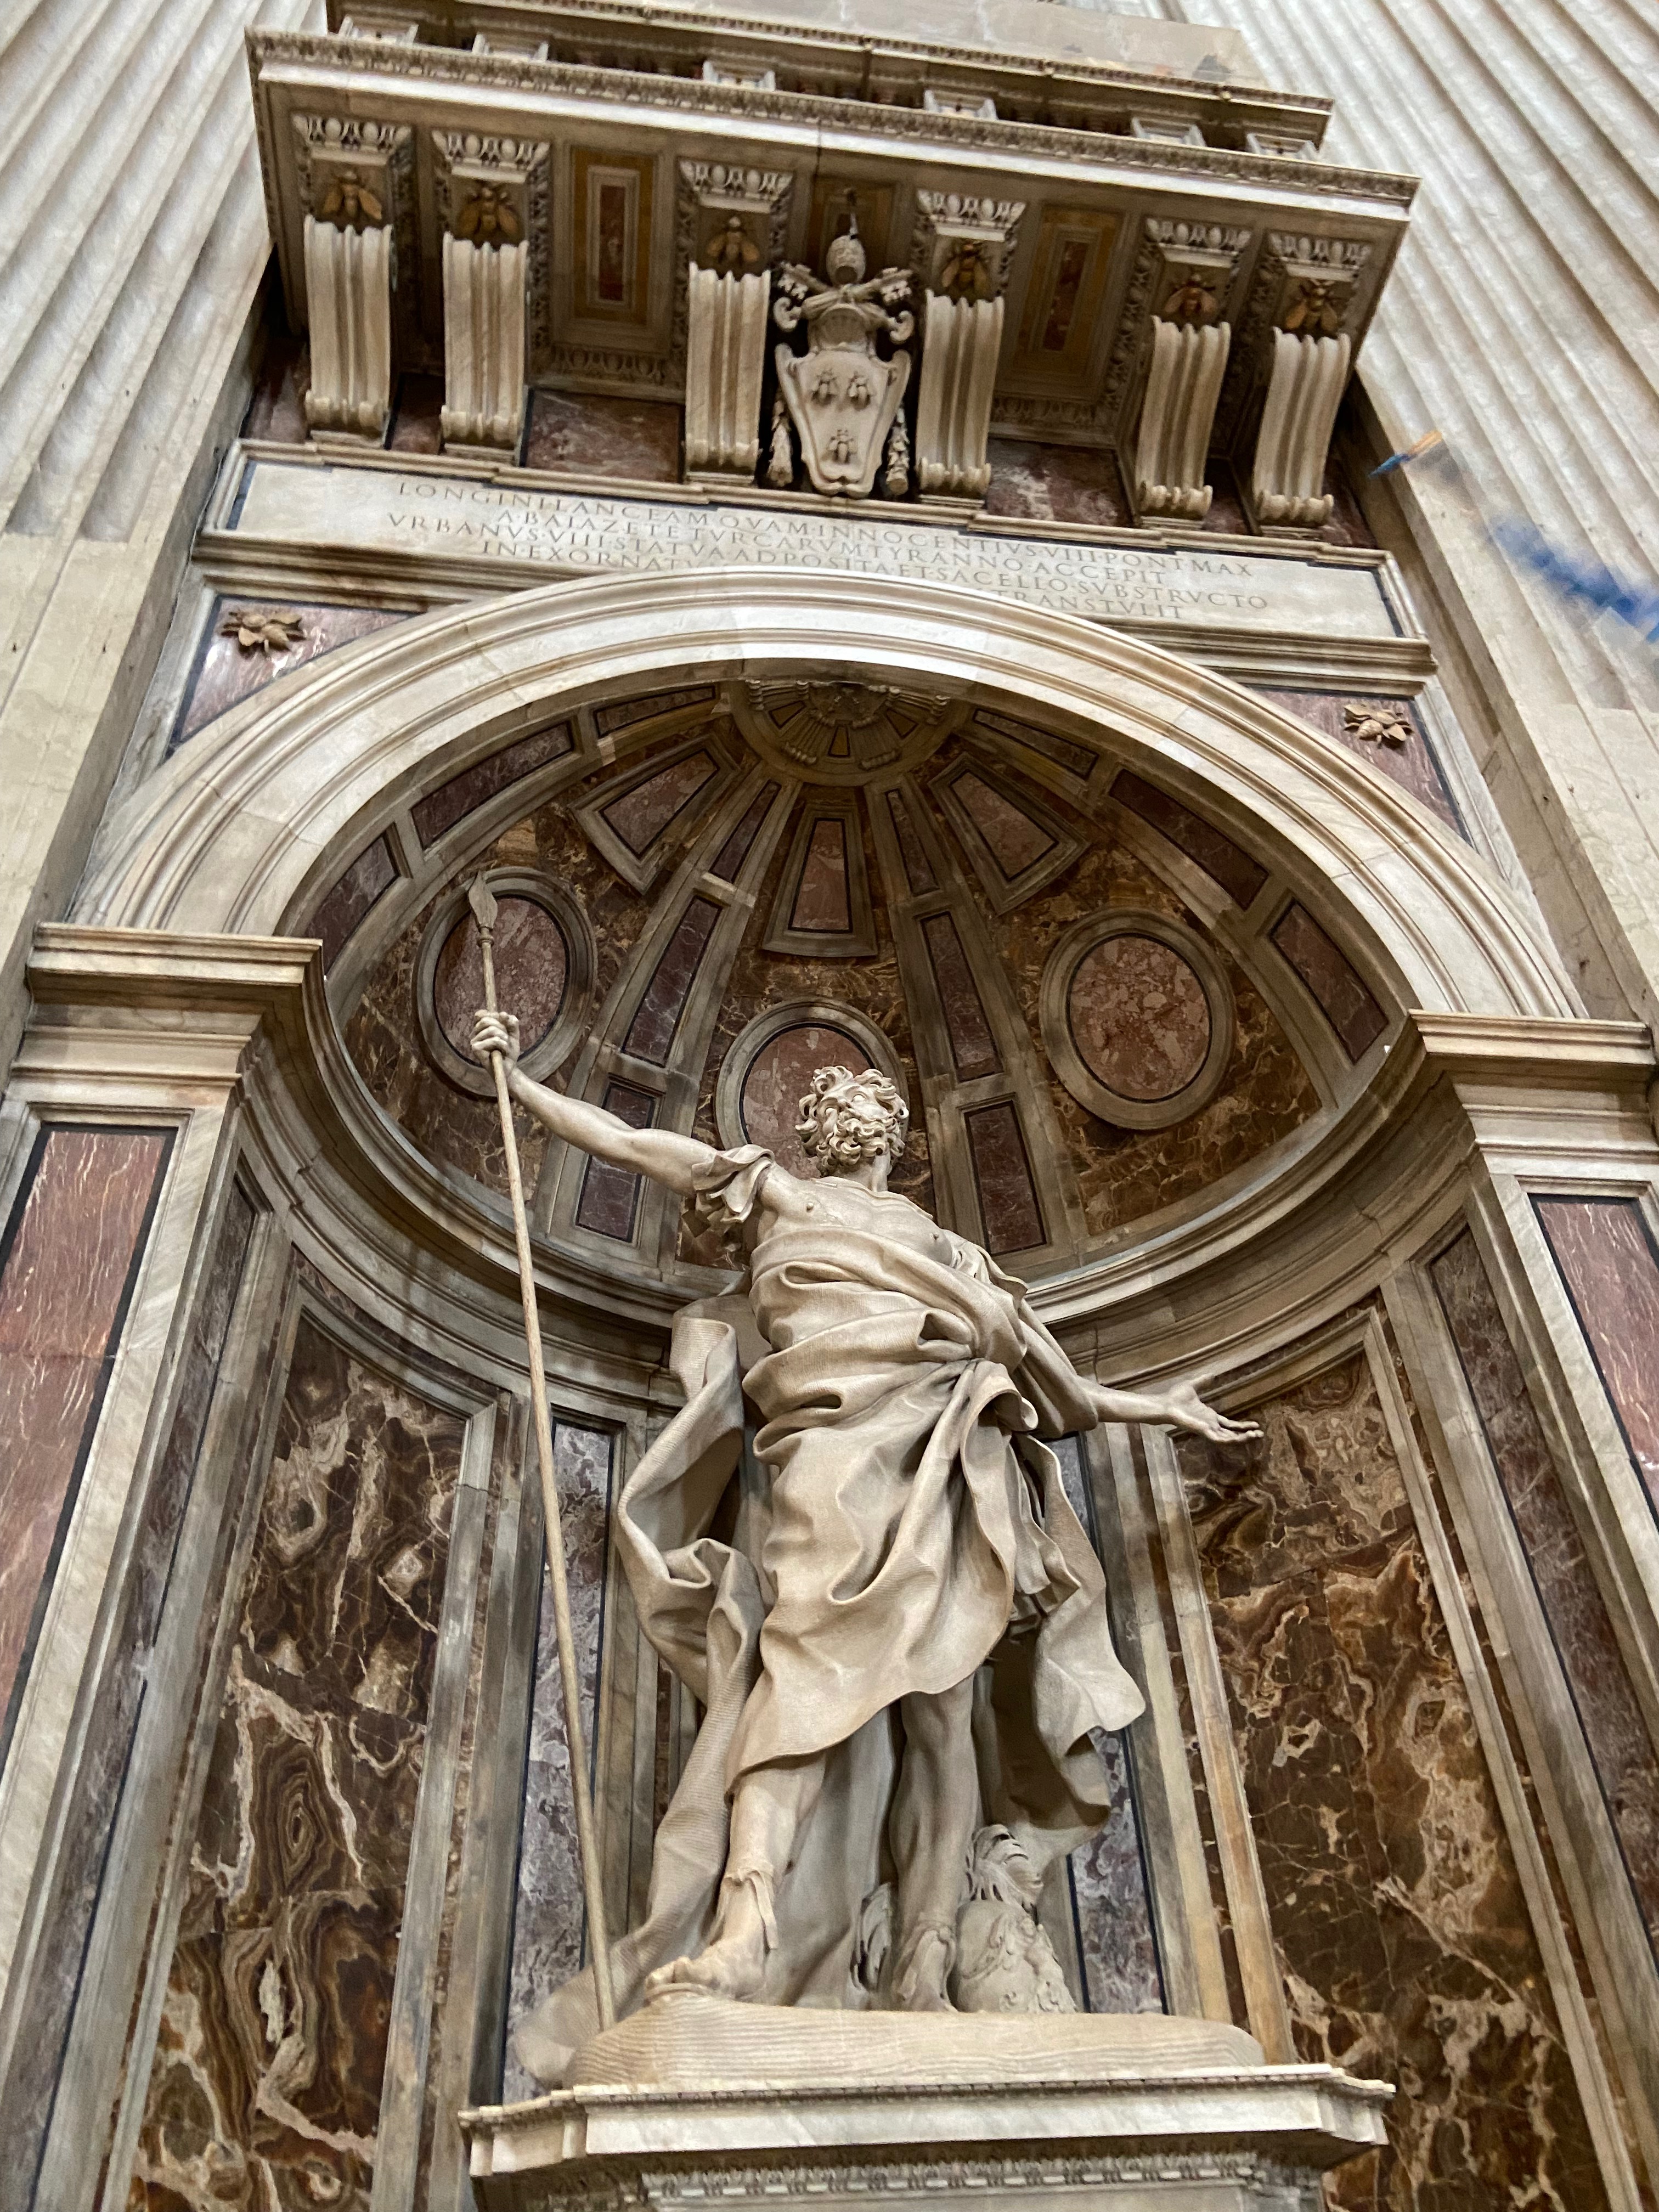 Famous statue in St. Peter's Basilica.